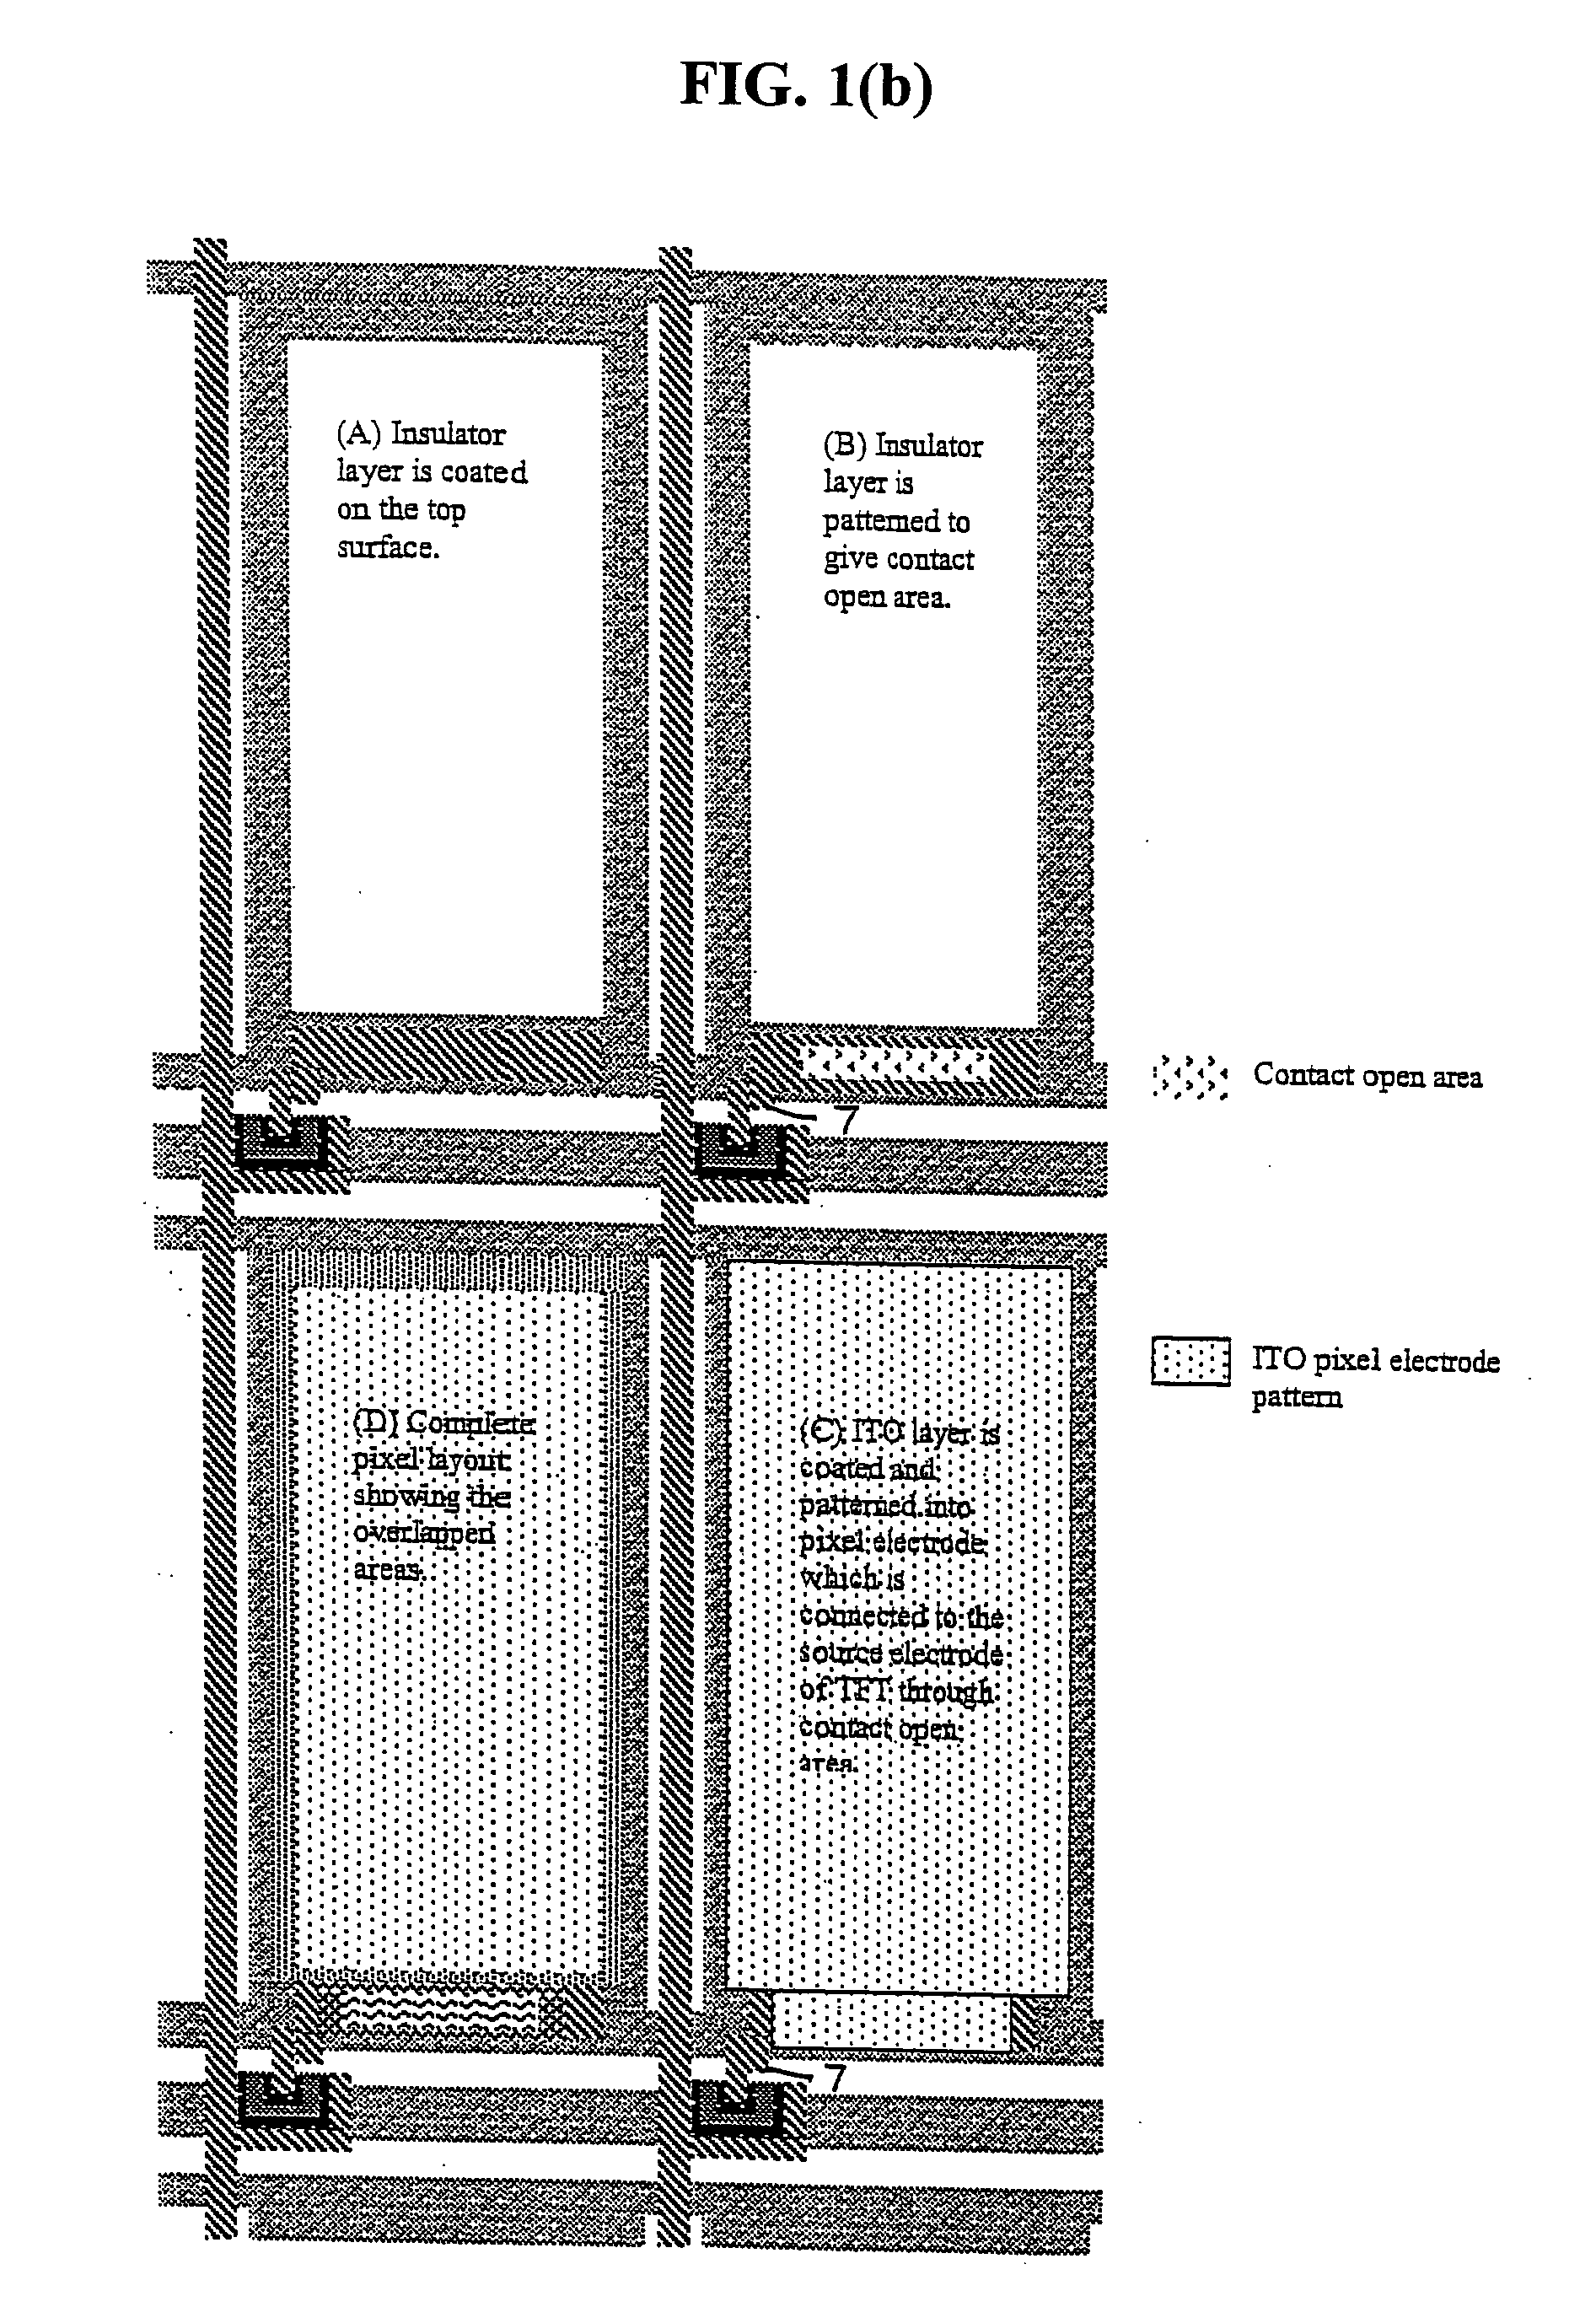 System and method for classifying defects in and identifying process problems for an electrical circuit